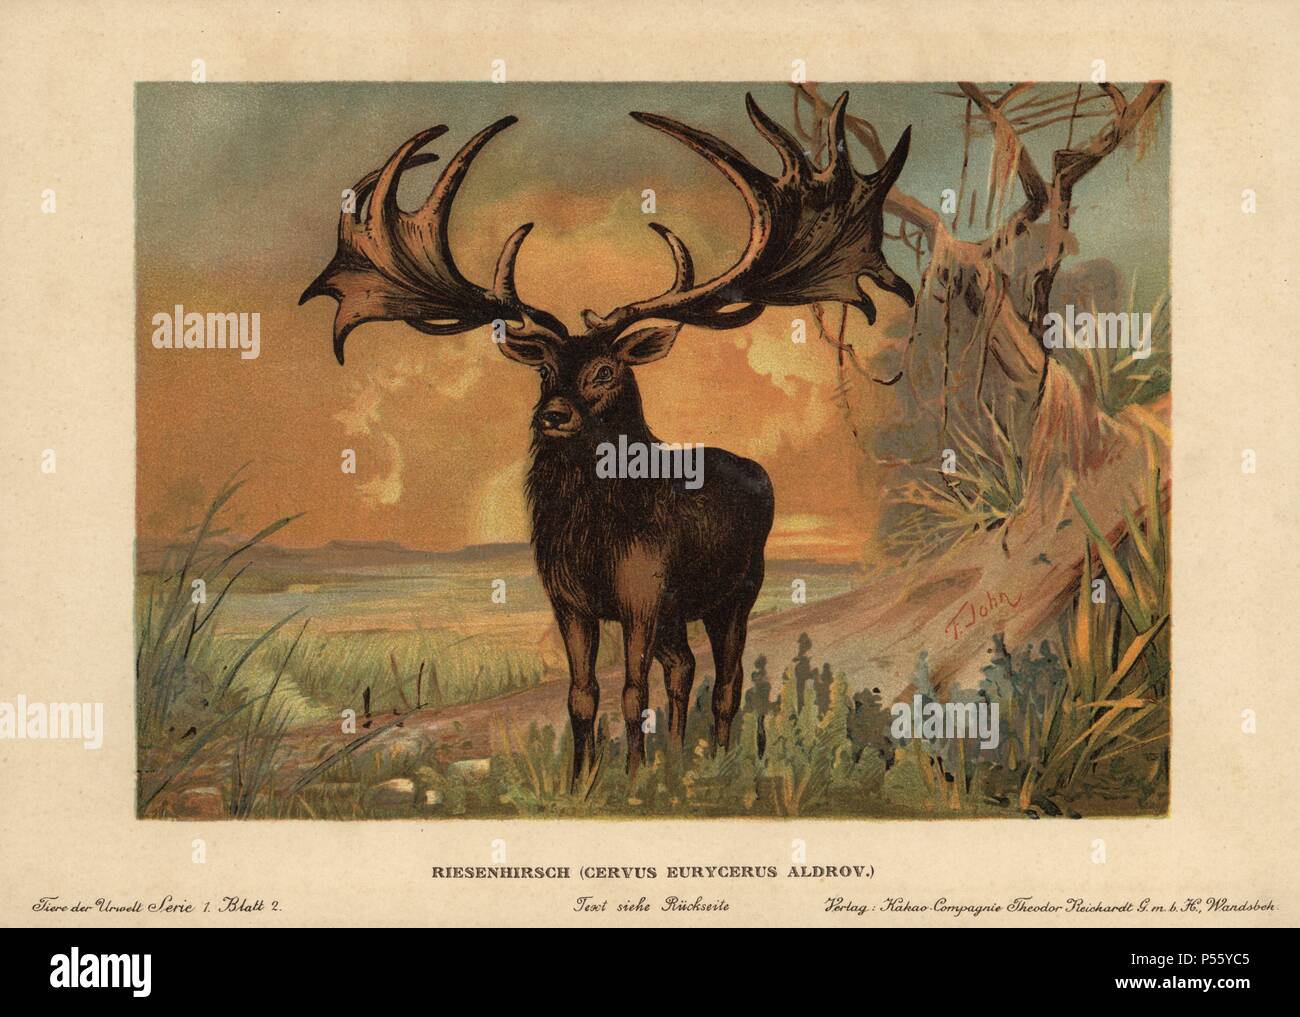 Irish Elk, Megaloceros giganteus, extinct species of giant deer from the Late Pleistocene. Colour printed (chromolithograph) illustration by F. John from 'Tiere der Urwelt' Animals of the Prehistoric World, 1910, Hamburg. From a series of prehistoric creature cards published by the Reichardt Cocoa company. Stock Photo